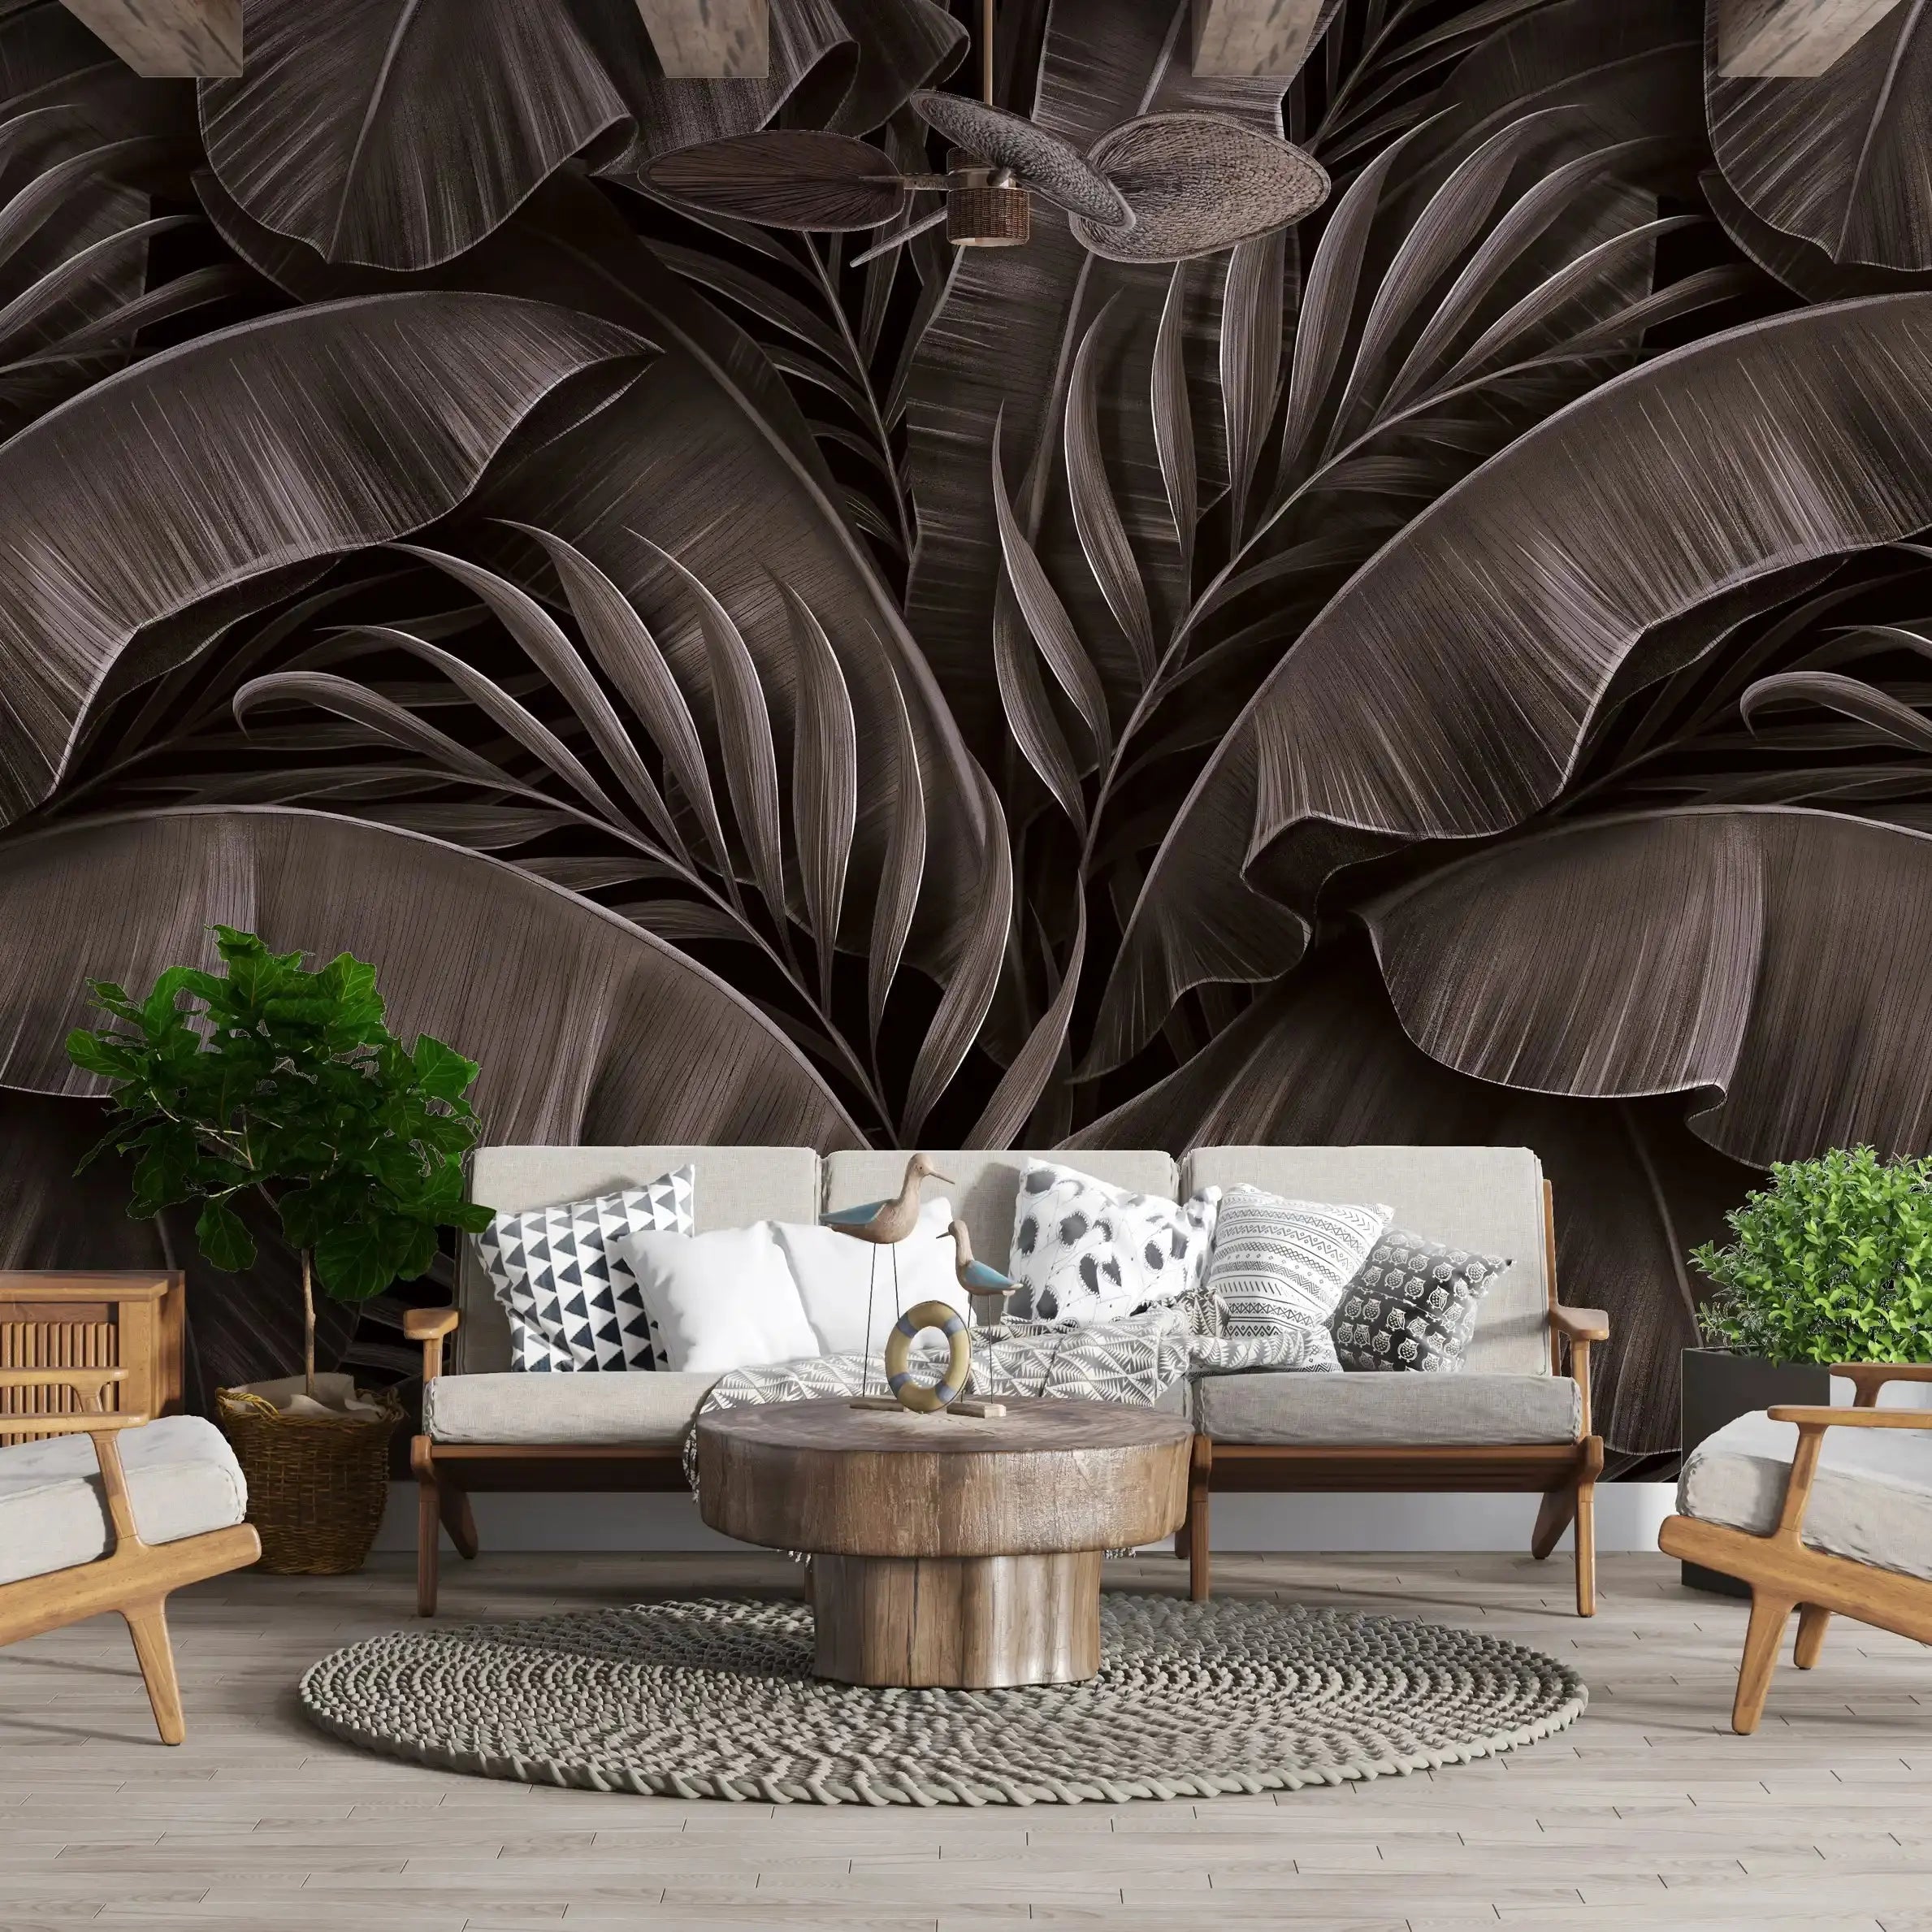 3026-D / Tropical Jungle Leaves Wallpaper, Peel and Stick Mural, Ideal for Bathroom, Bedroom, and Kitchen - Artevella